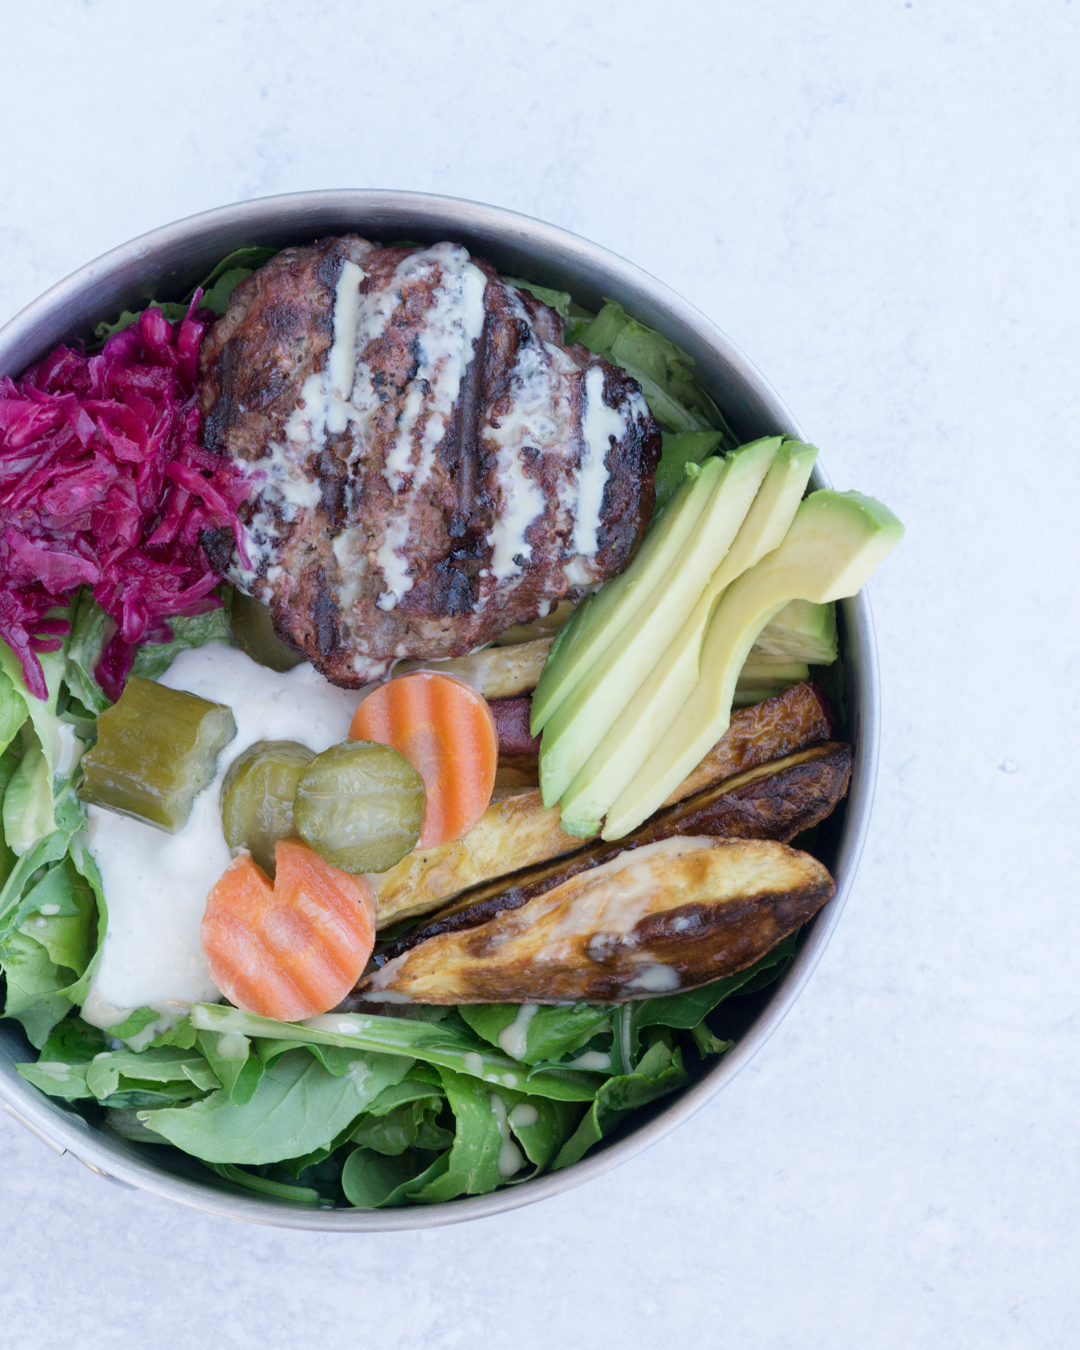 Paleo Elk Burger Bowl in Tin bowl on cement background: mixed greens topped with cashew cream, pickled cucumbers and carrots, roasted sweet potato fries, red sauerkraut, elk burger and tahini